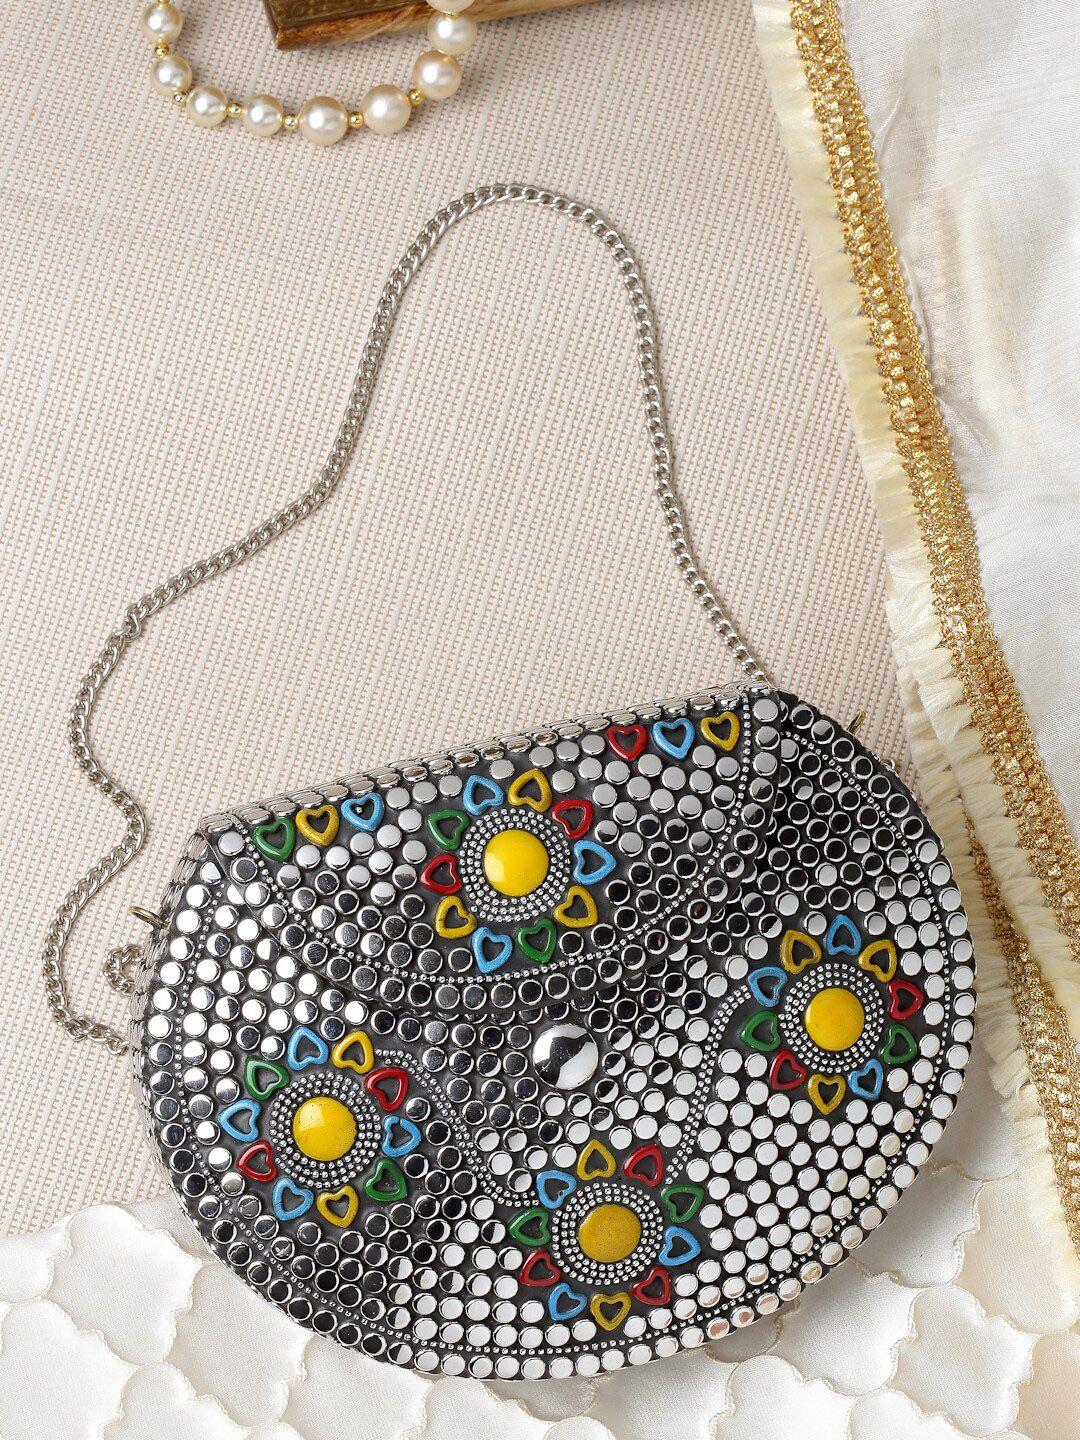 anekaant embellished foldover clutch